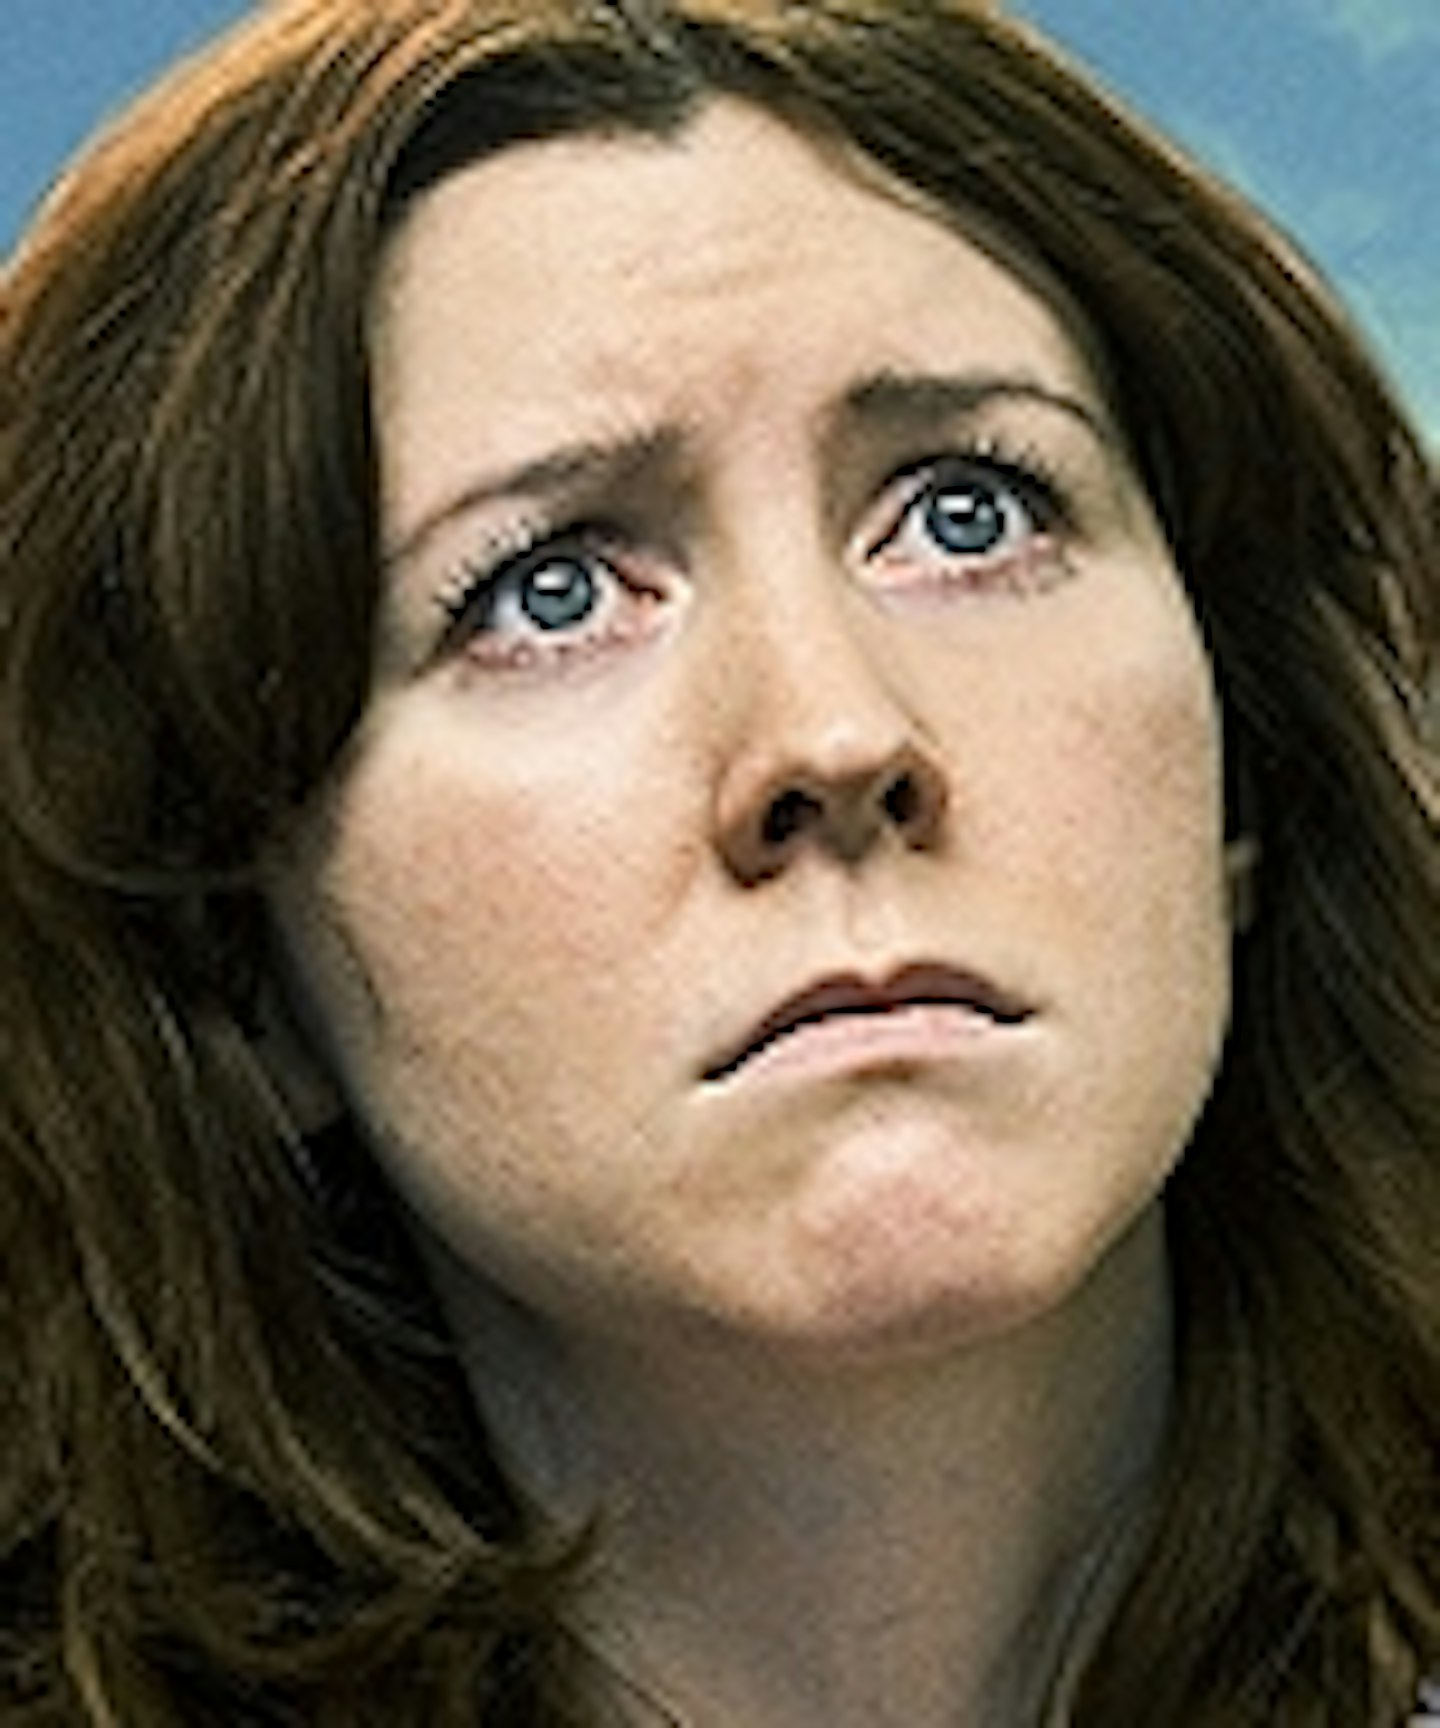 Four New Exclusive Sightseers Posters